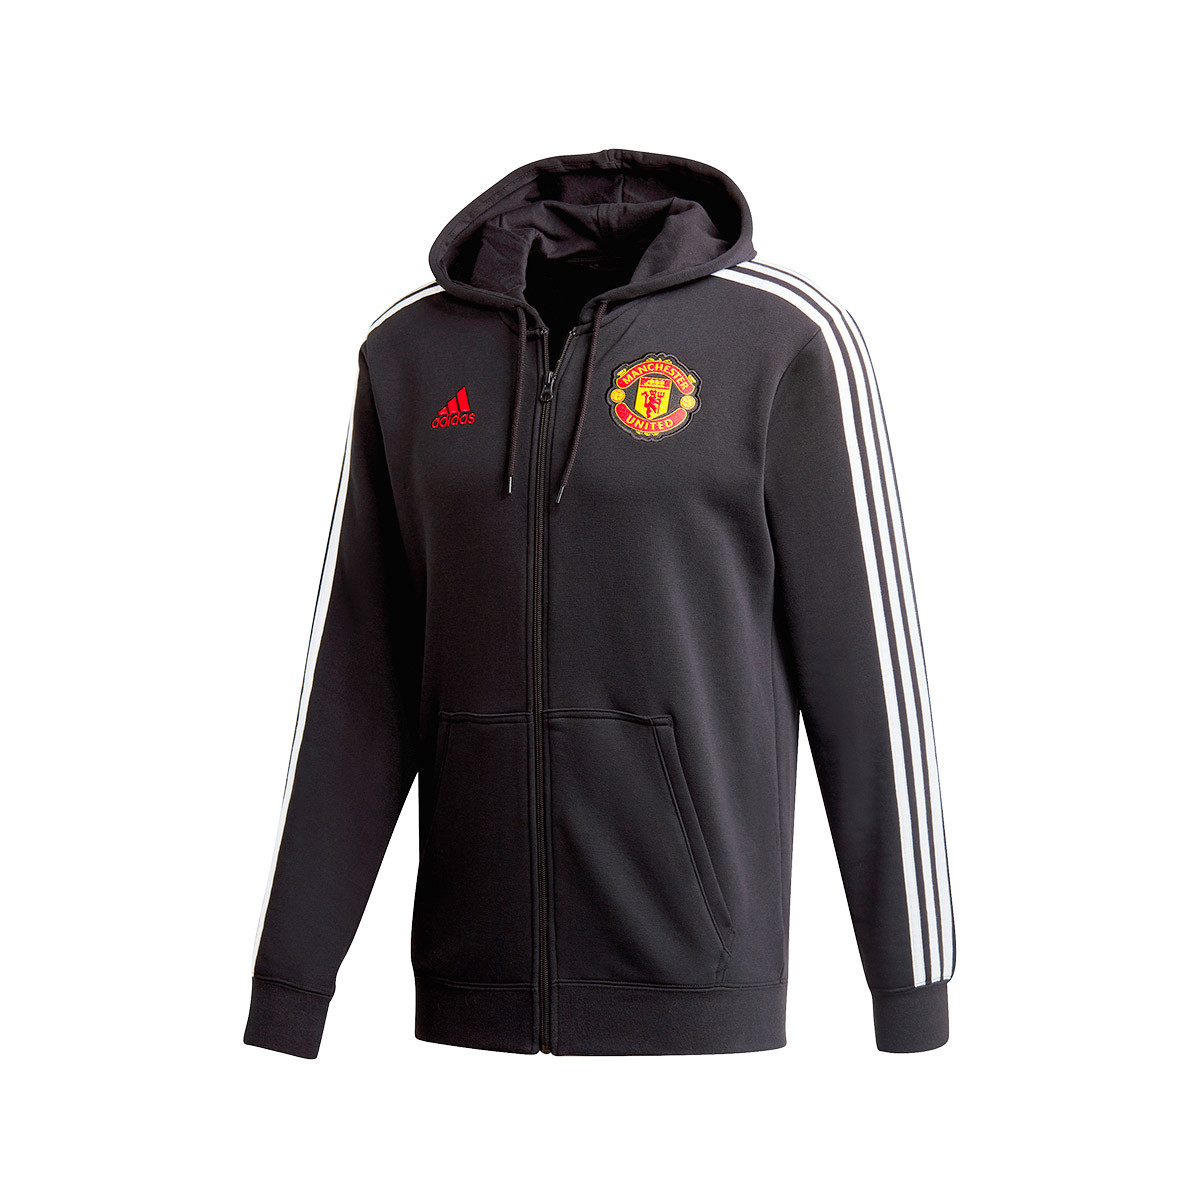 adidas jacket the brand with 3 stripes